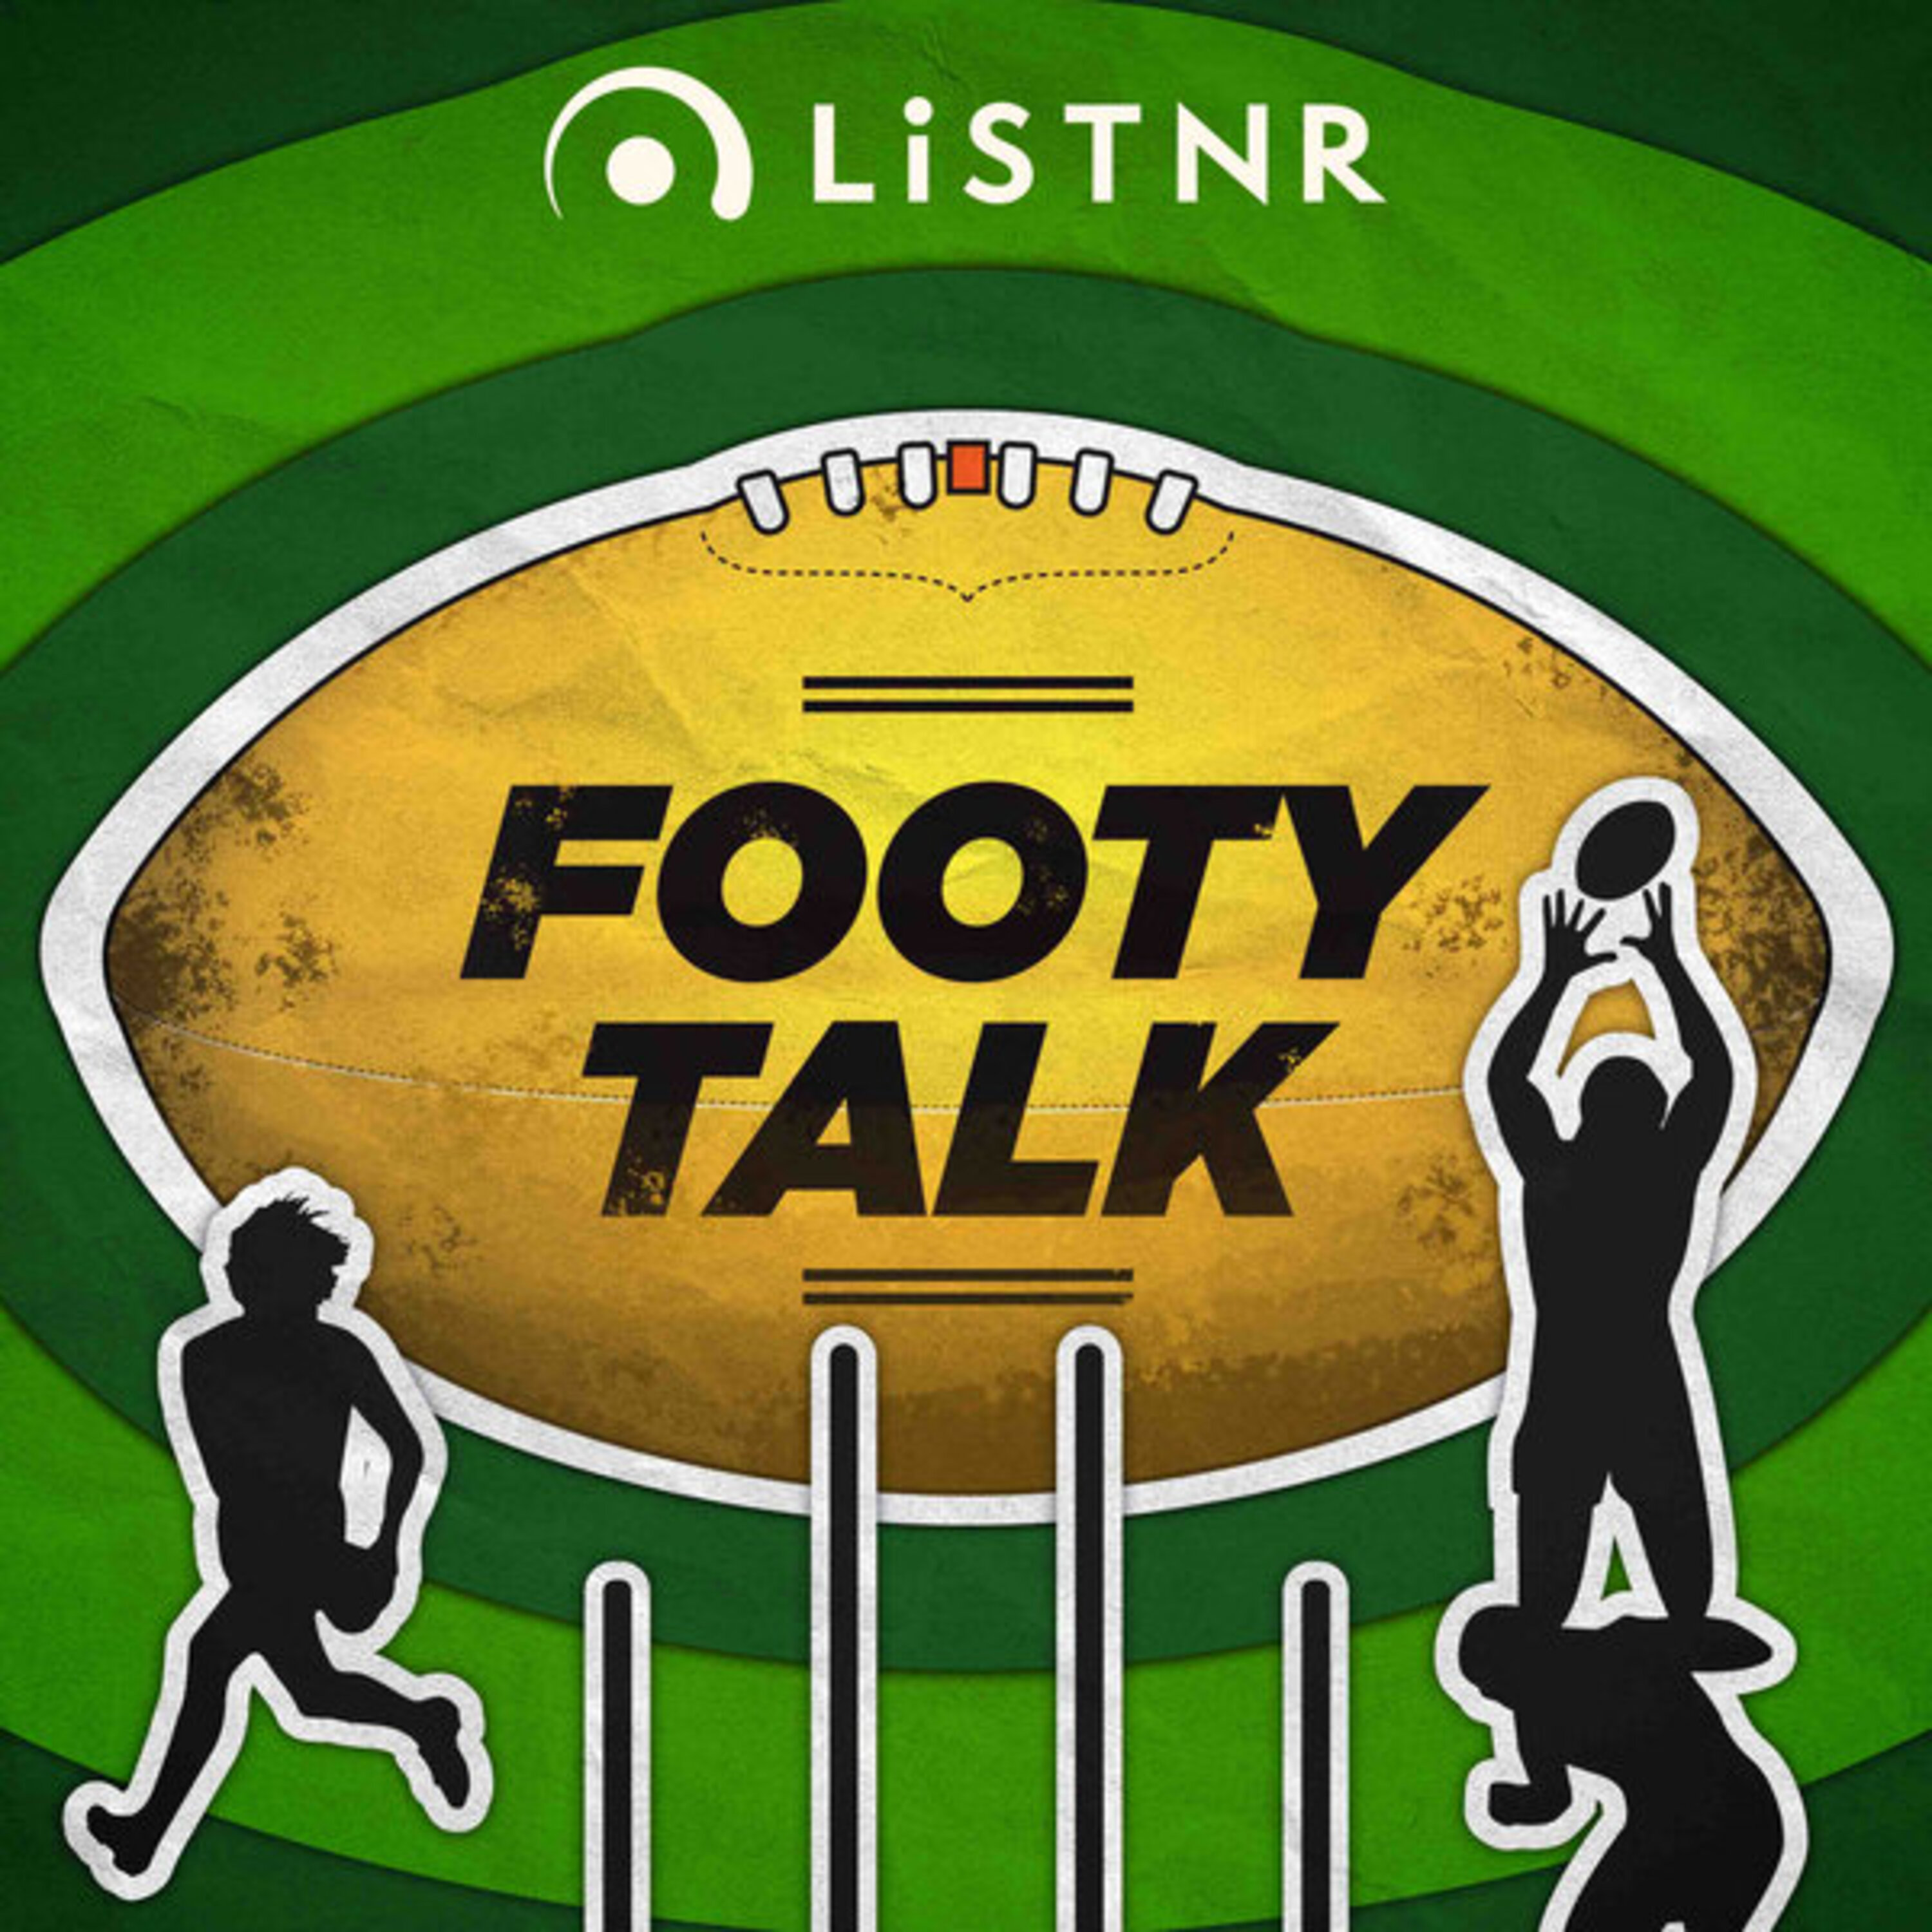 FOOTY TALK | Nick Riewoldt and Joey Montagna talk rallying after heartbreak, why they're suspicious of the Hawks, and some advice for Beau McCreery